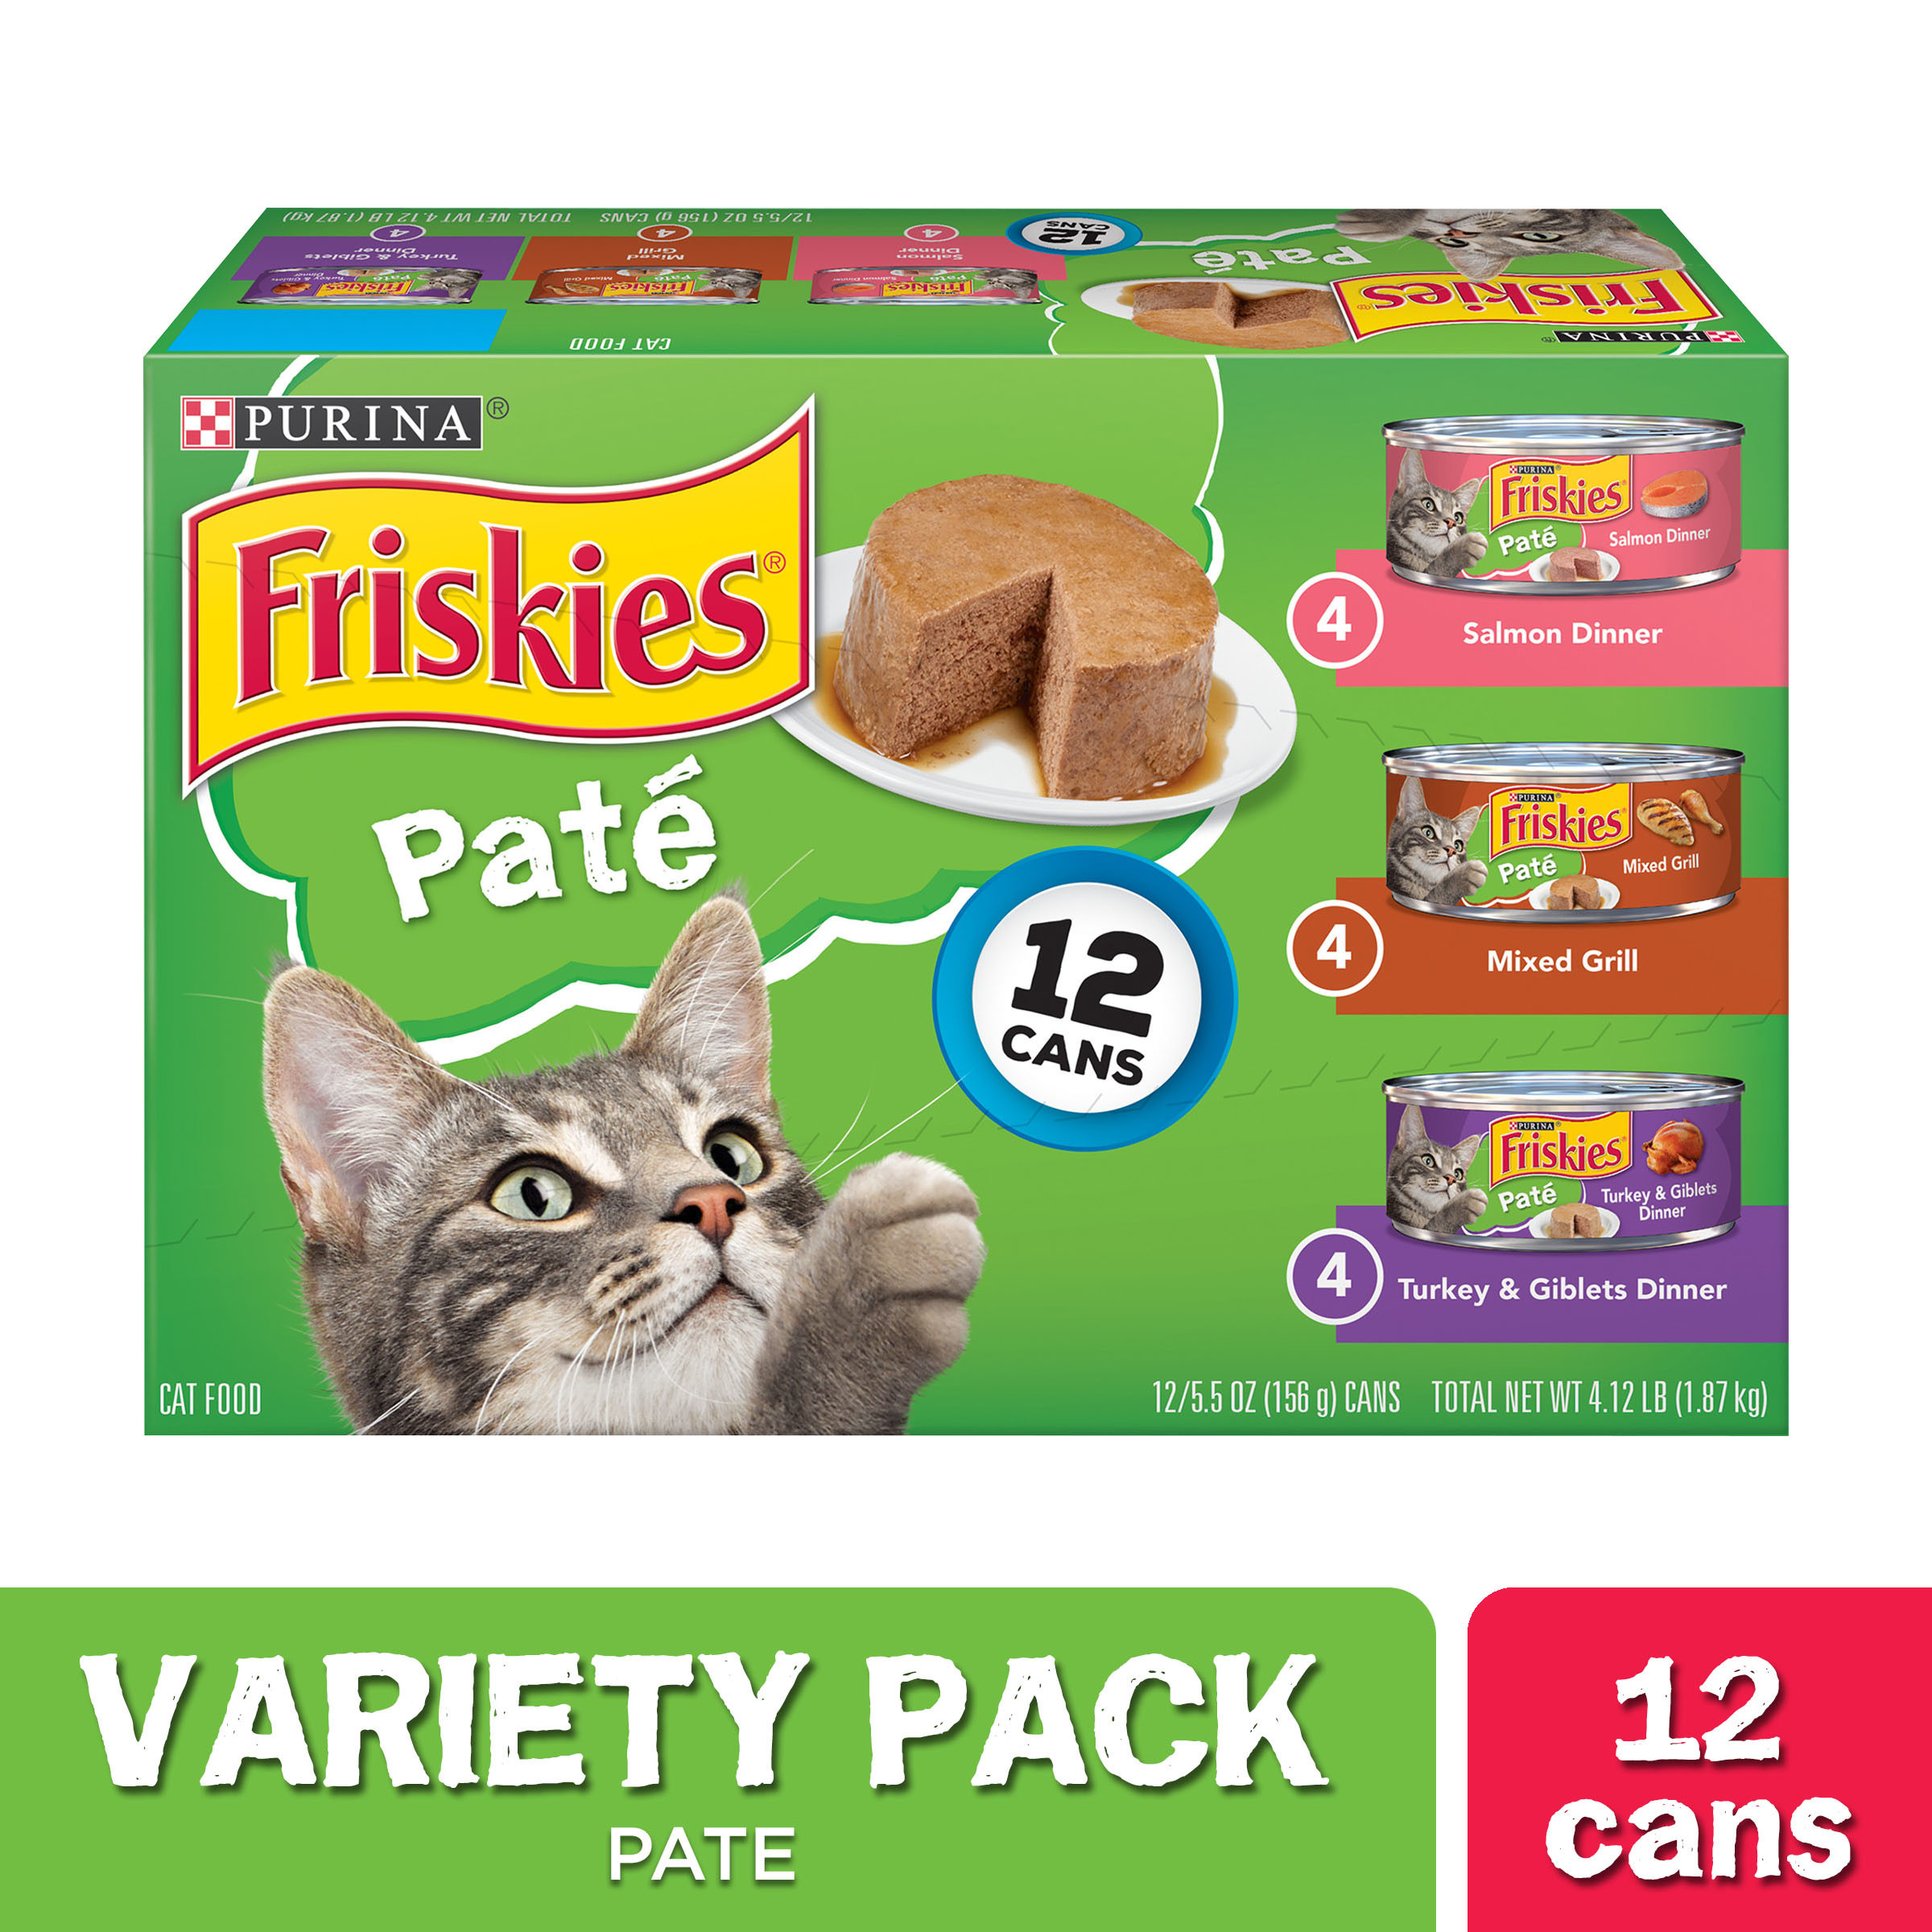 Purina Friskies Wet Cat Food Pate Variety Pack Salmon, Turkey and Grilled - image 1 of 10